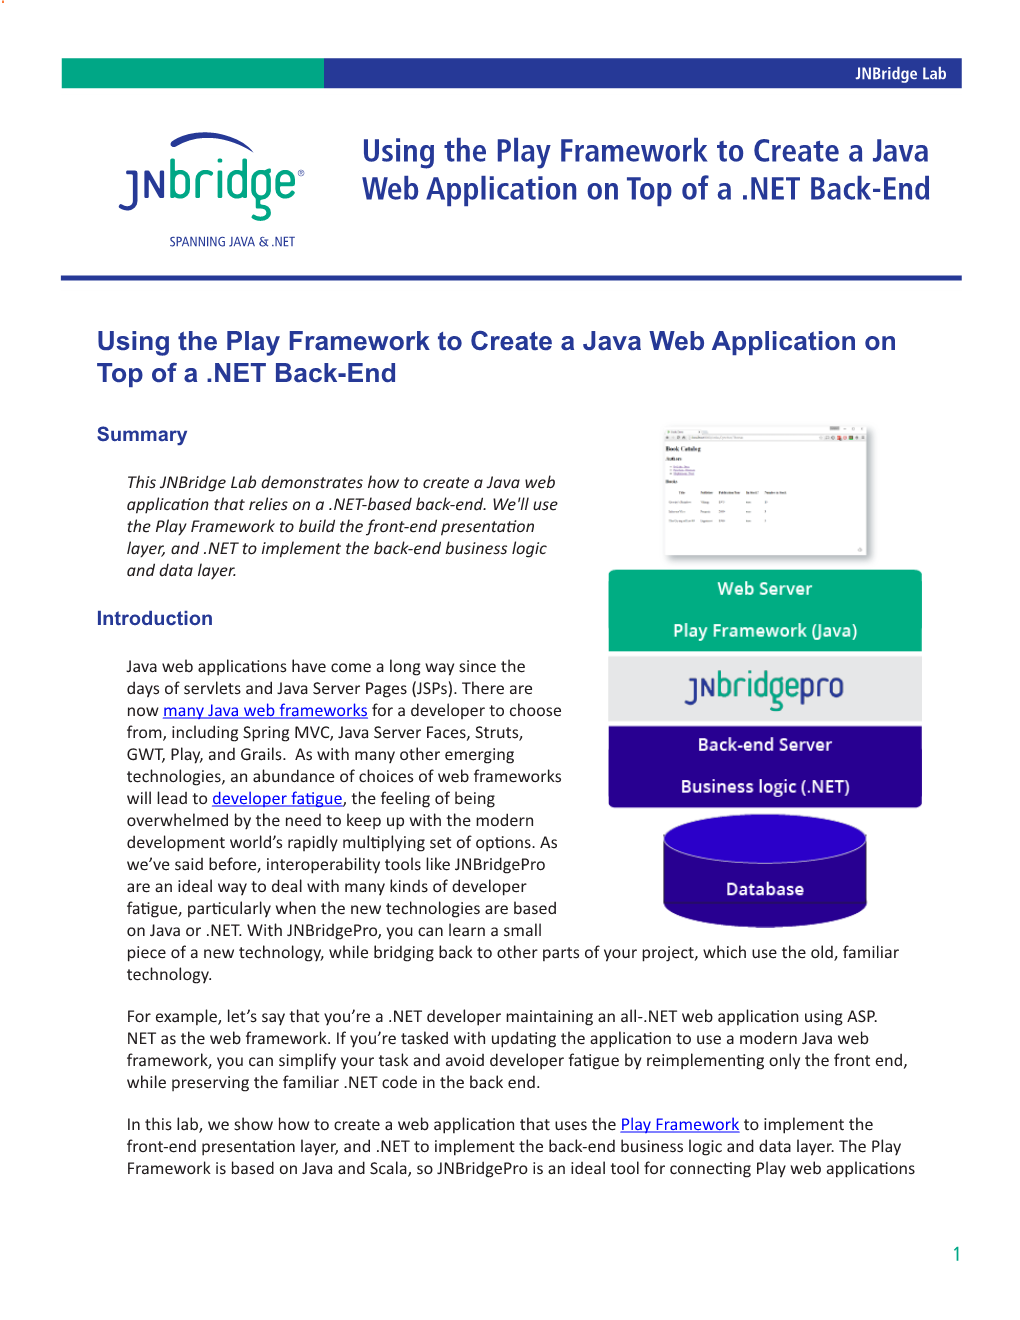 Using the Play Framework to Create a Java Web Application on Top of a .NET Back-End